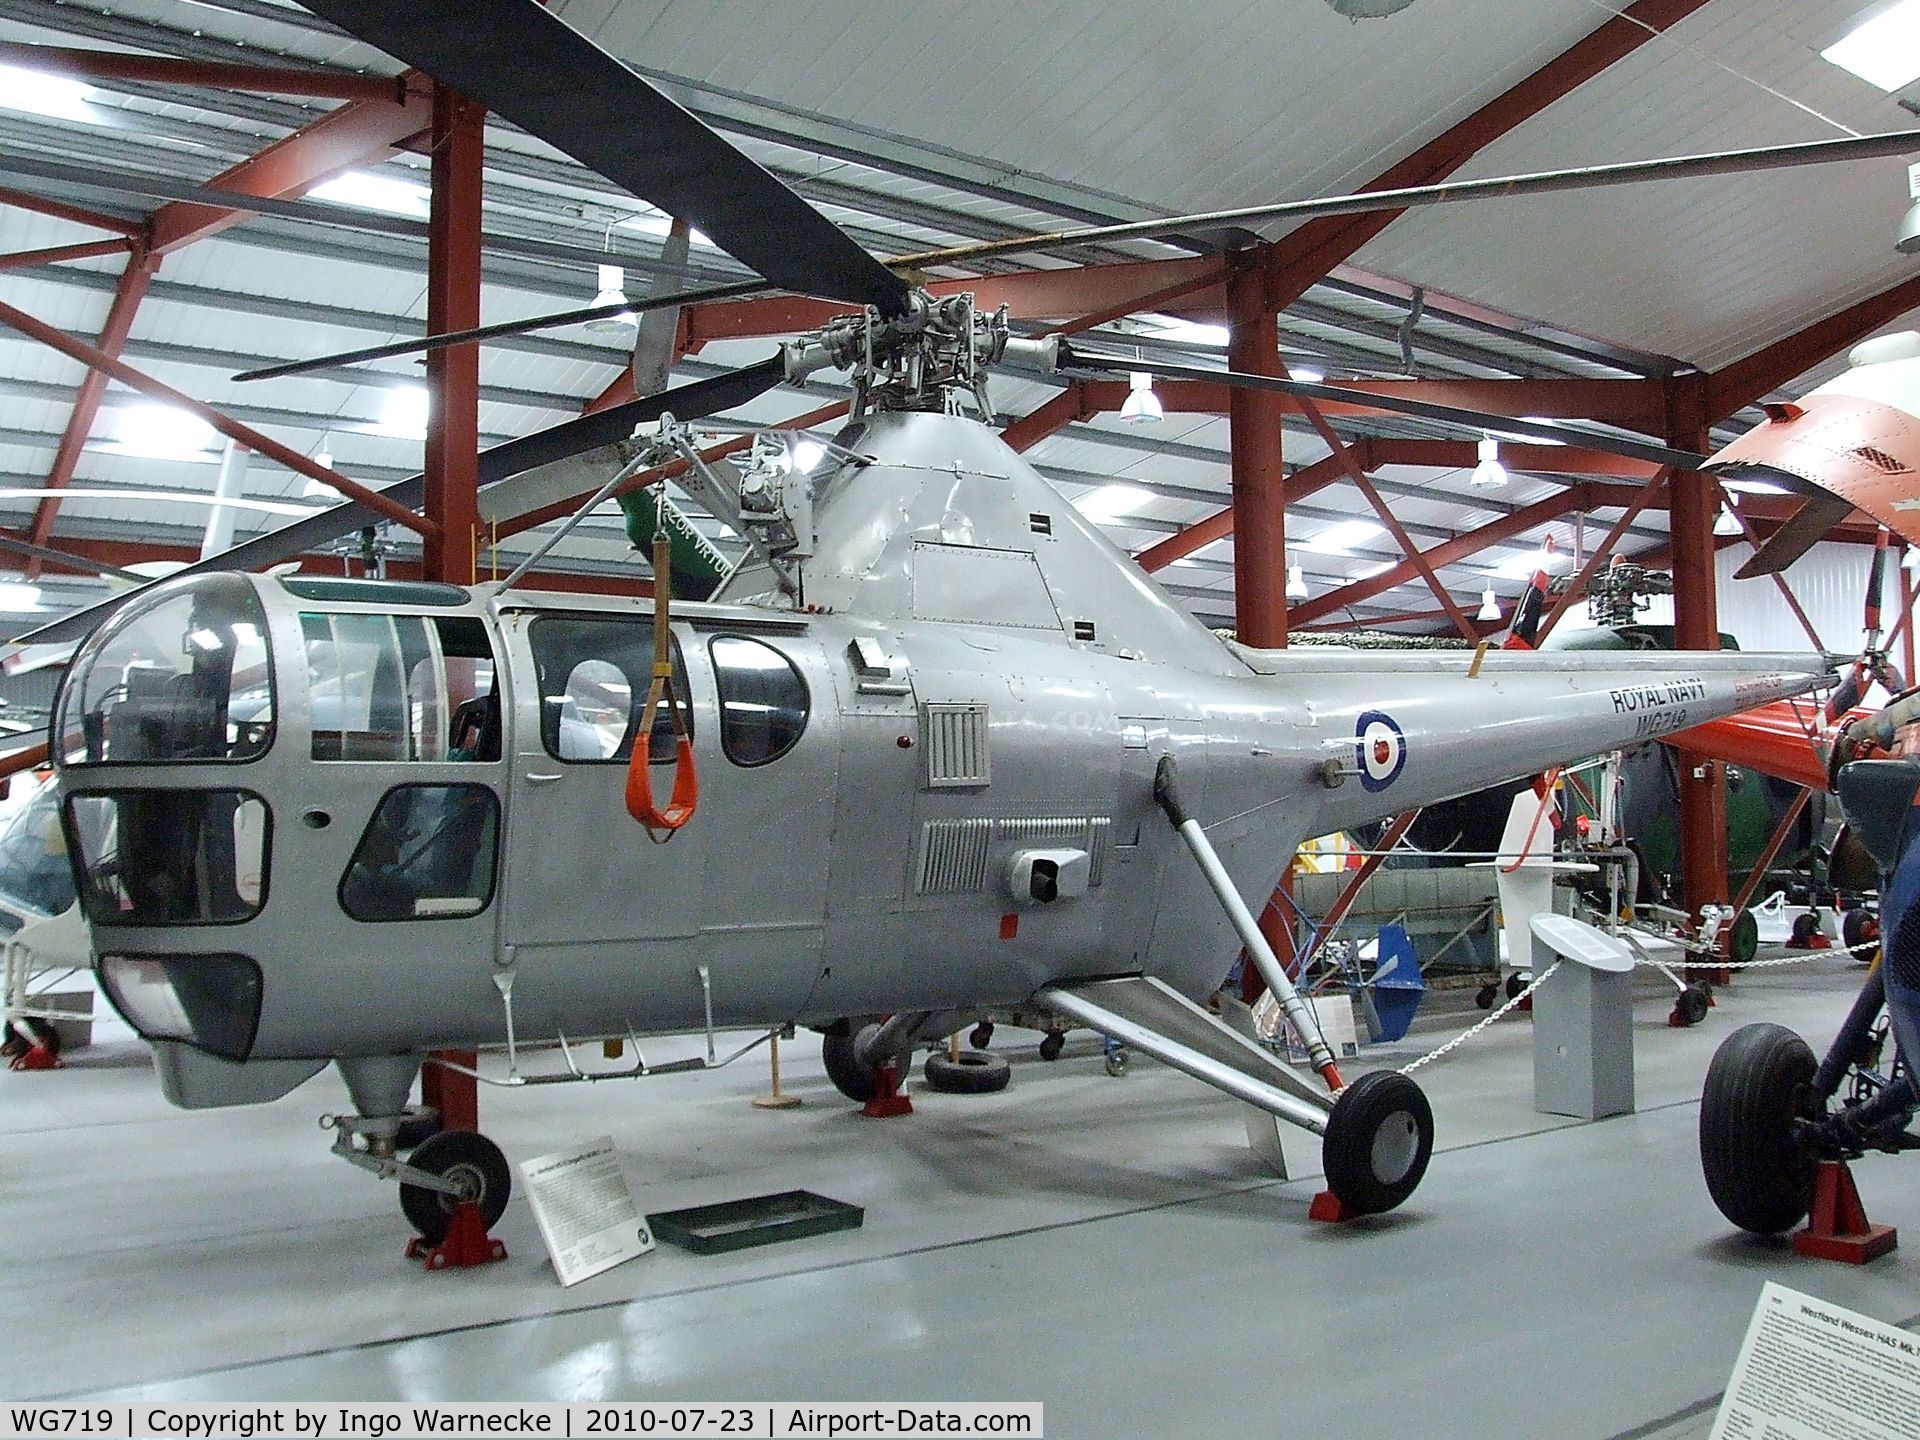 WG719, 1952 Westland Dragonfly HR.5 C/N WA/H/50, Westland WS-51 Dragonfly HR5 at the Helicopter Museum, Weston-super-Mare